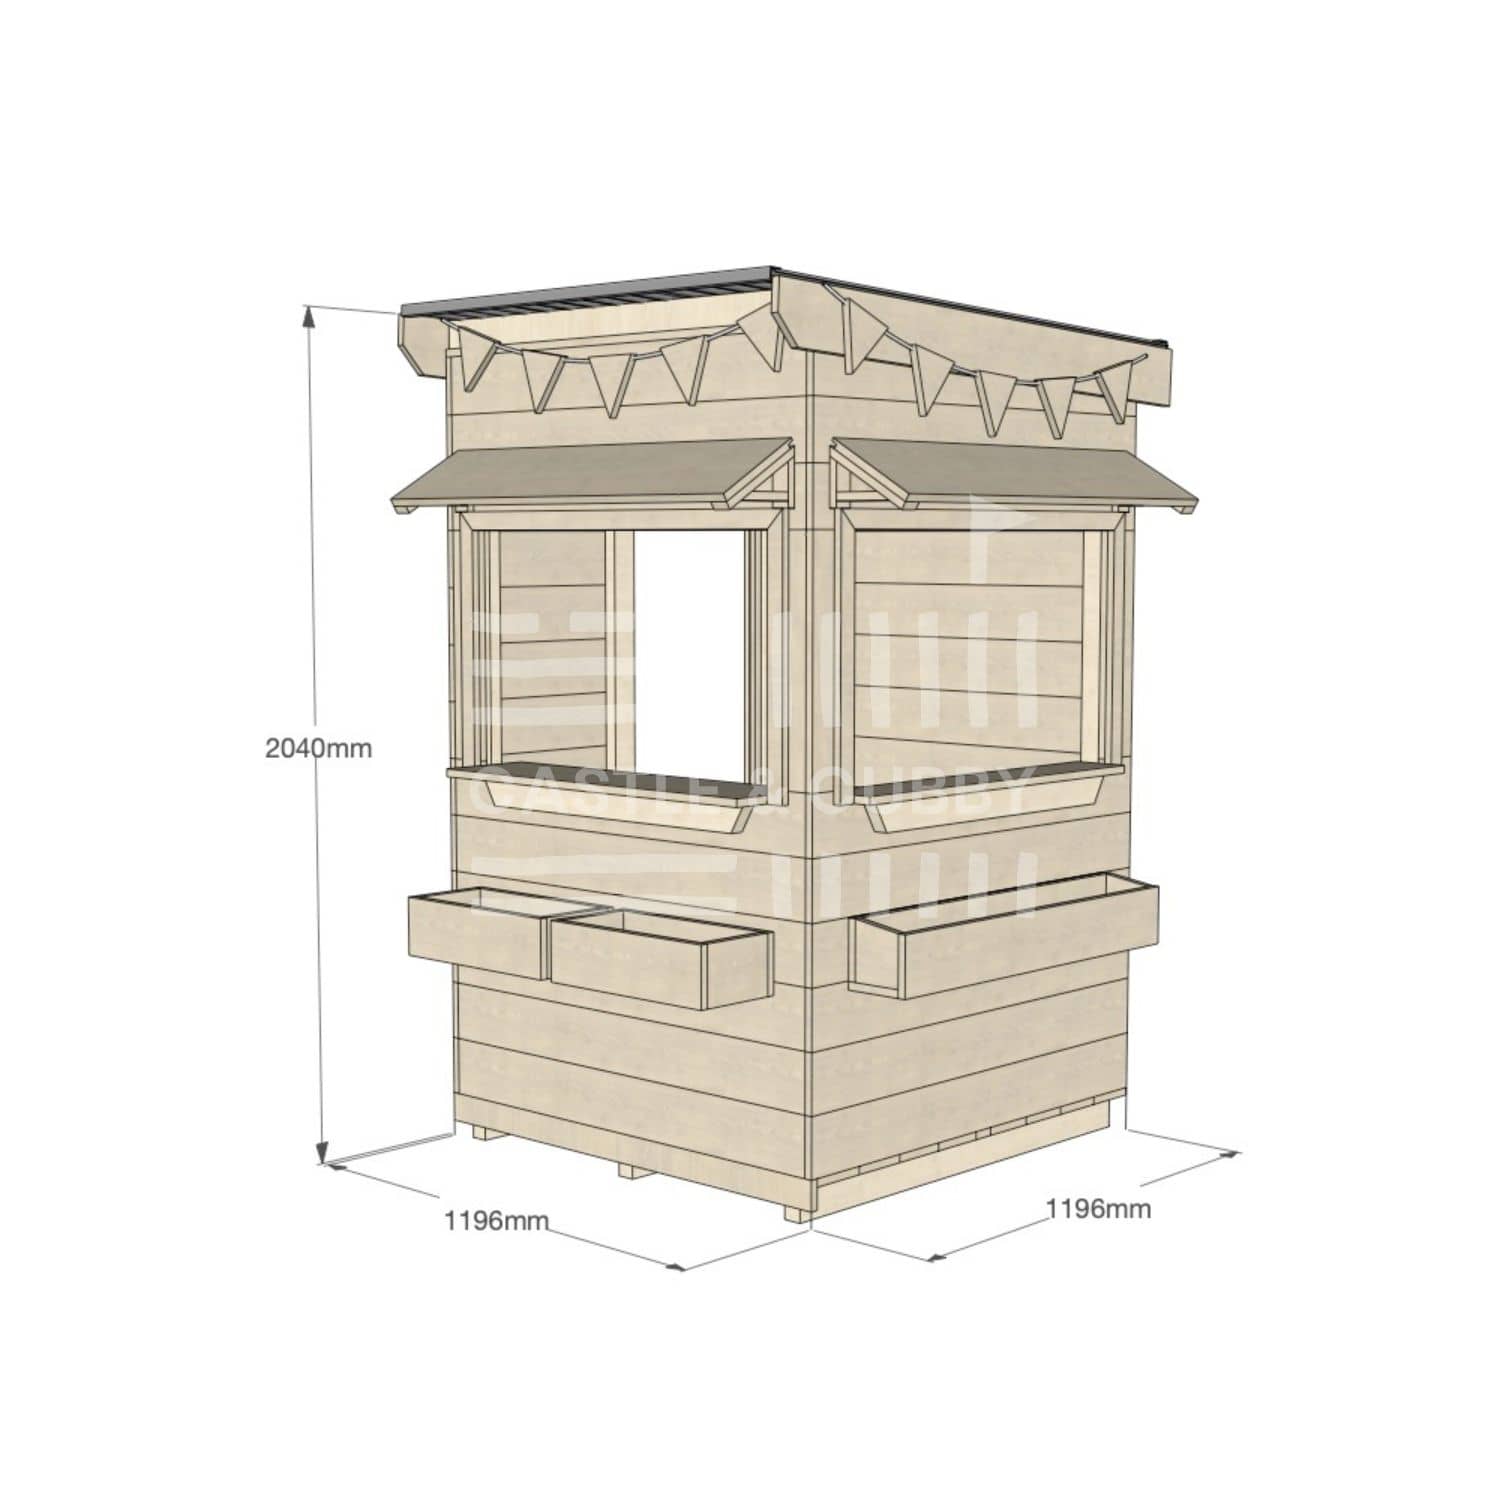 Flat roof raw extra height wooden cubby house commercial education little square dimensions